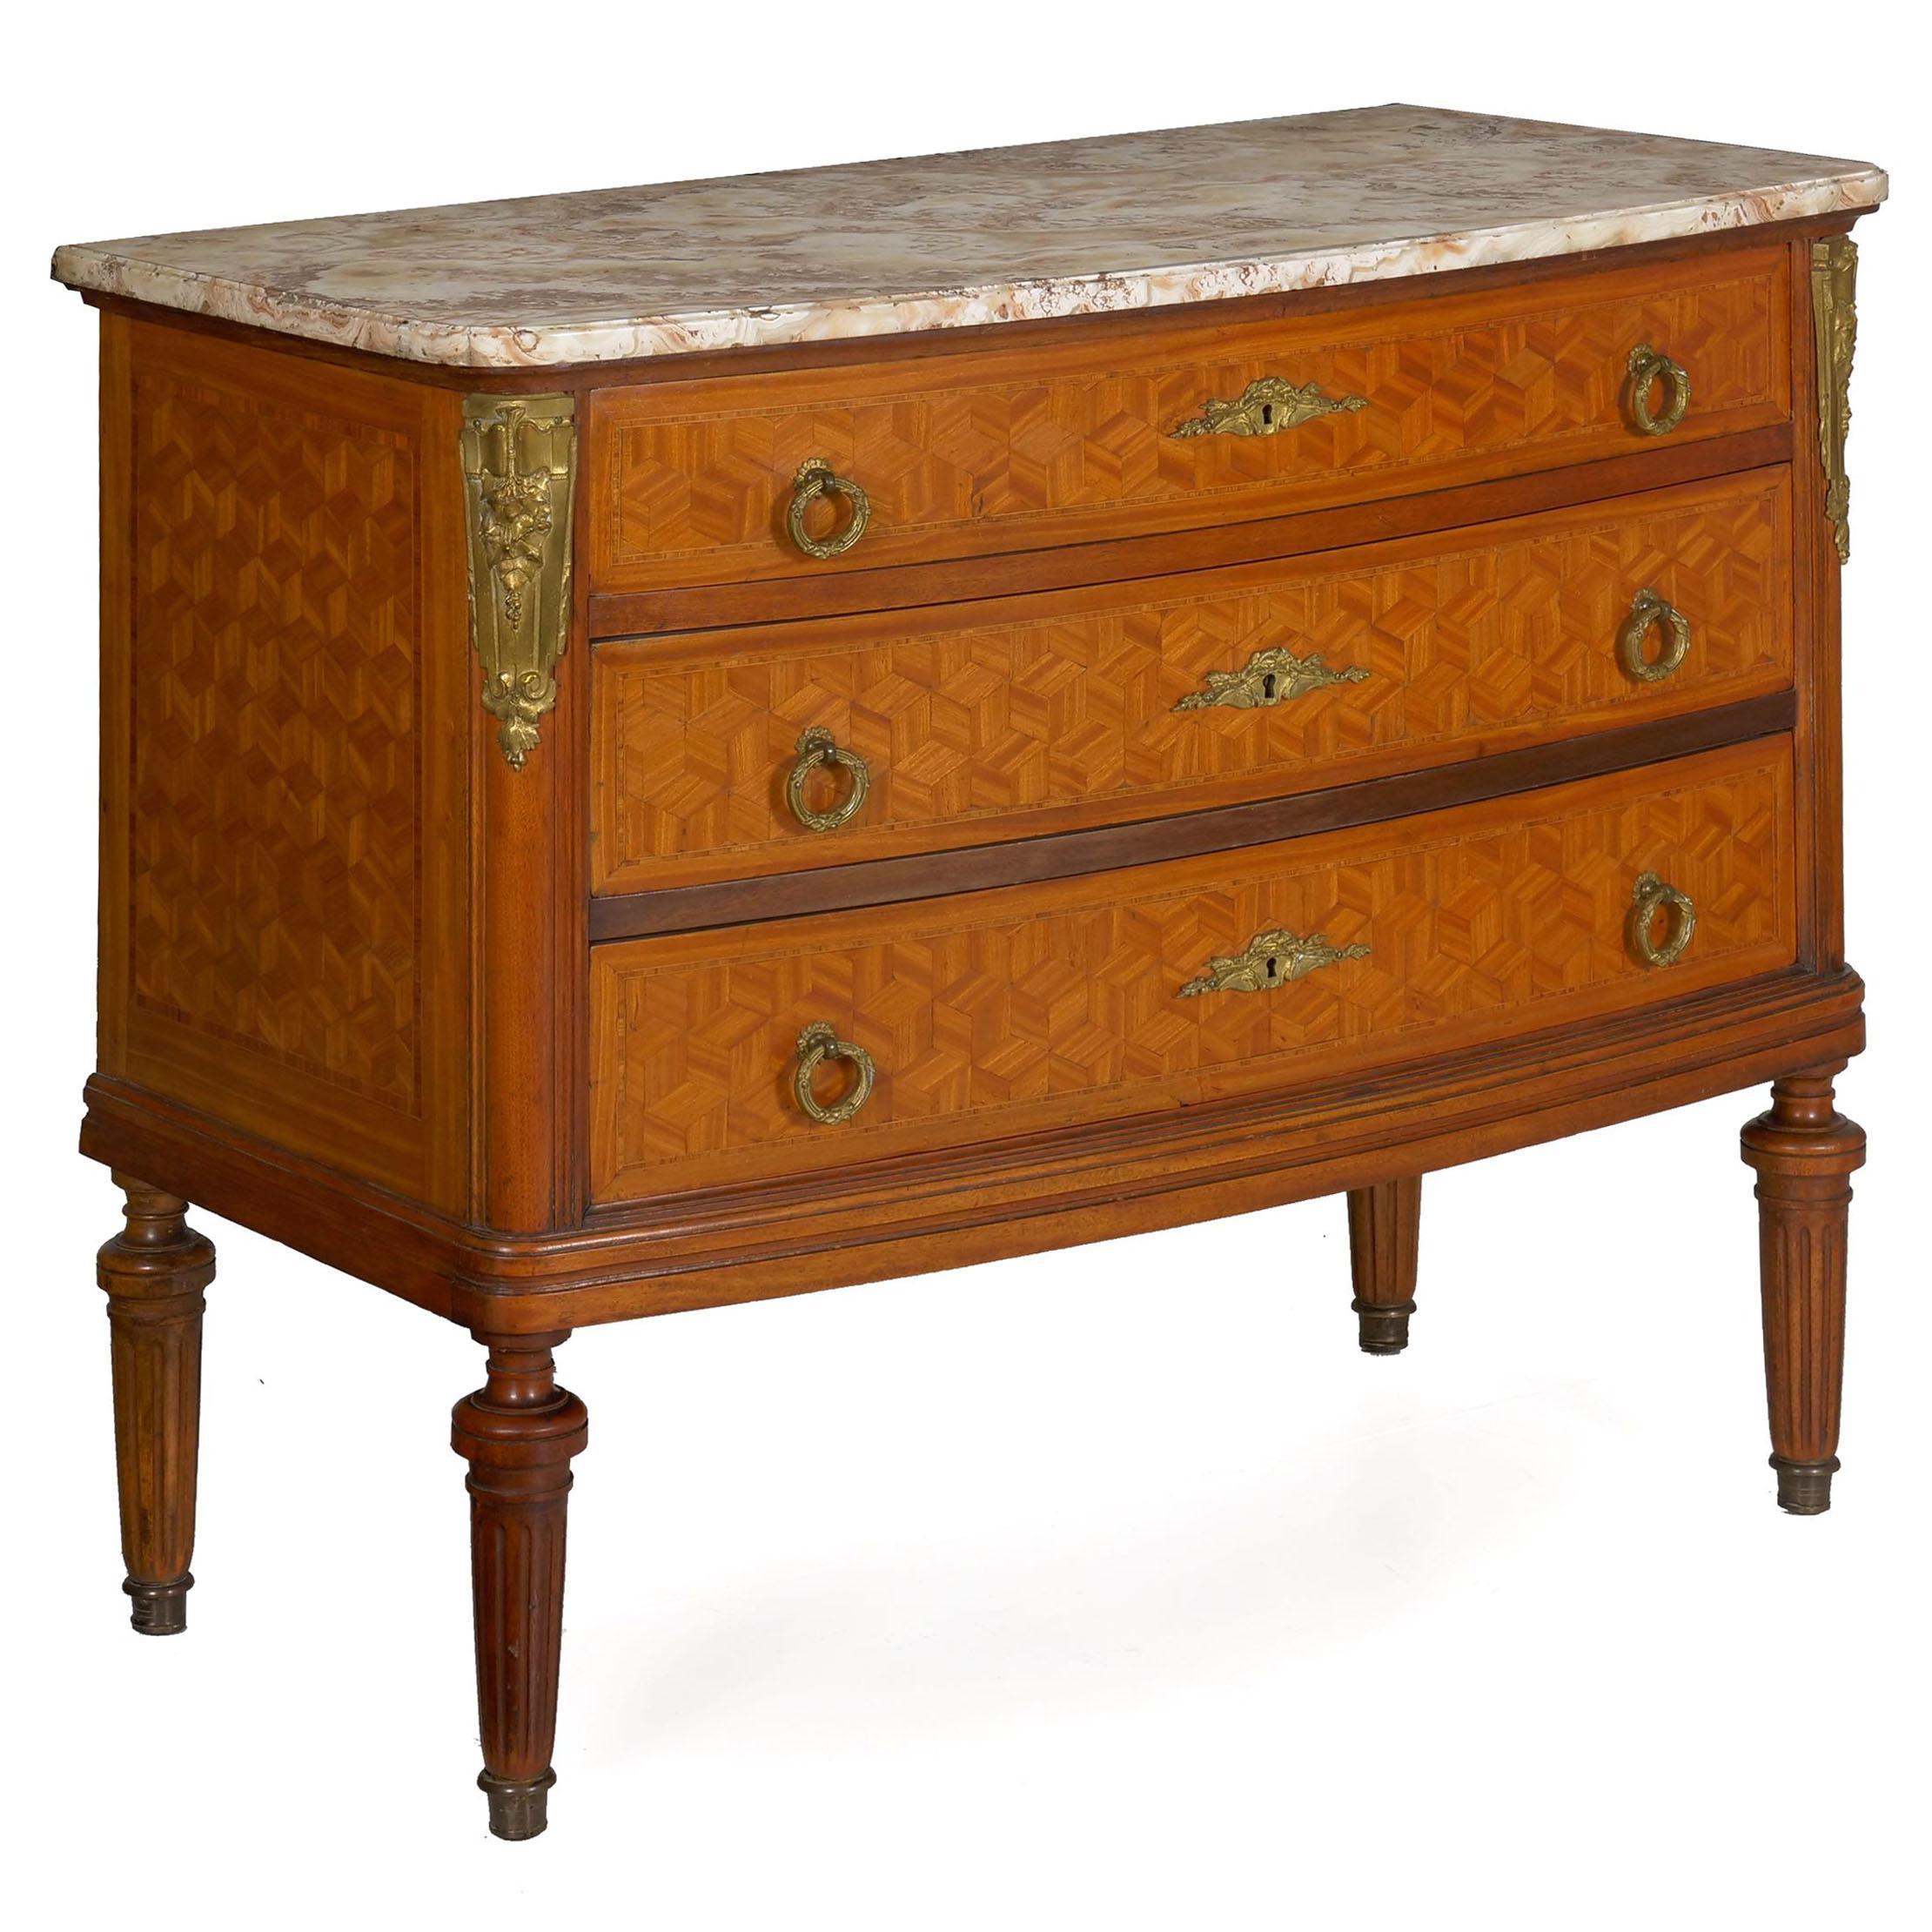 Neoclassical cube-parquetry inlaid three-drawer commode.
Continental, circa late 19th century.
Item # 007GUO30P 

An absolutely gorgeous three-drawer commode from the last quarter of the 19th century, this Fine presentation piece features a